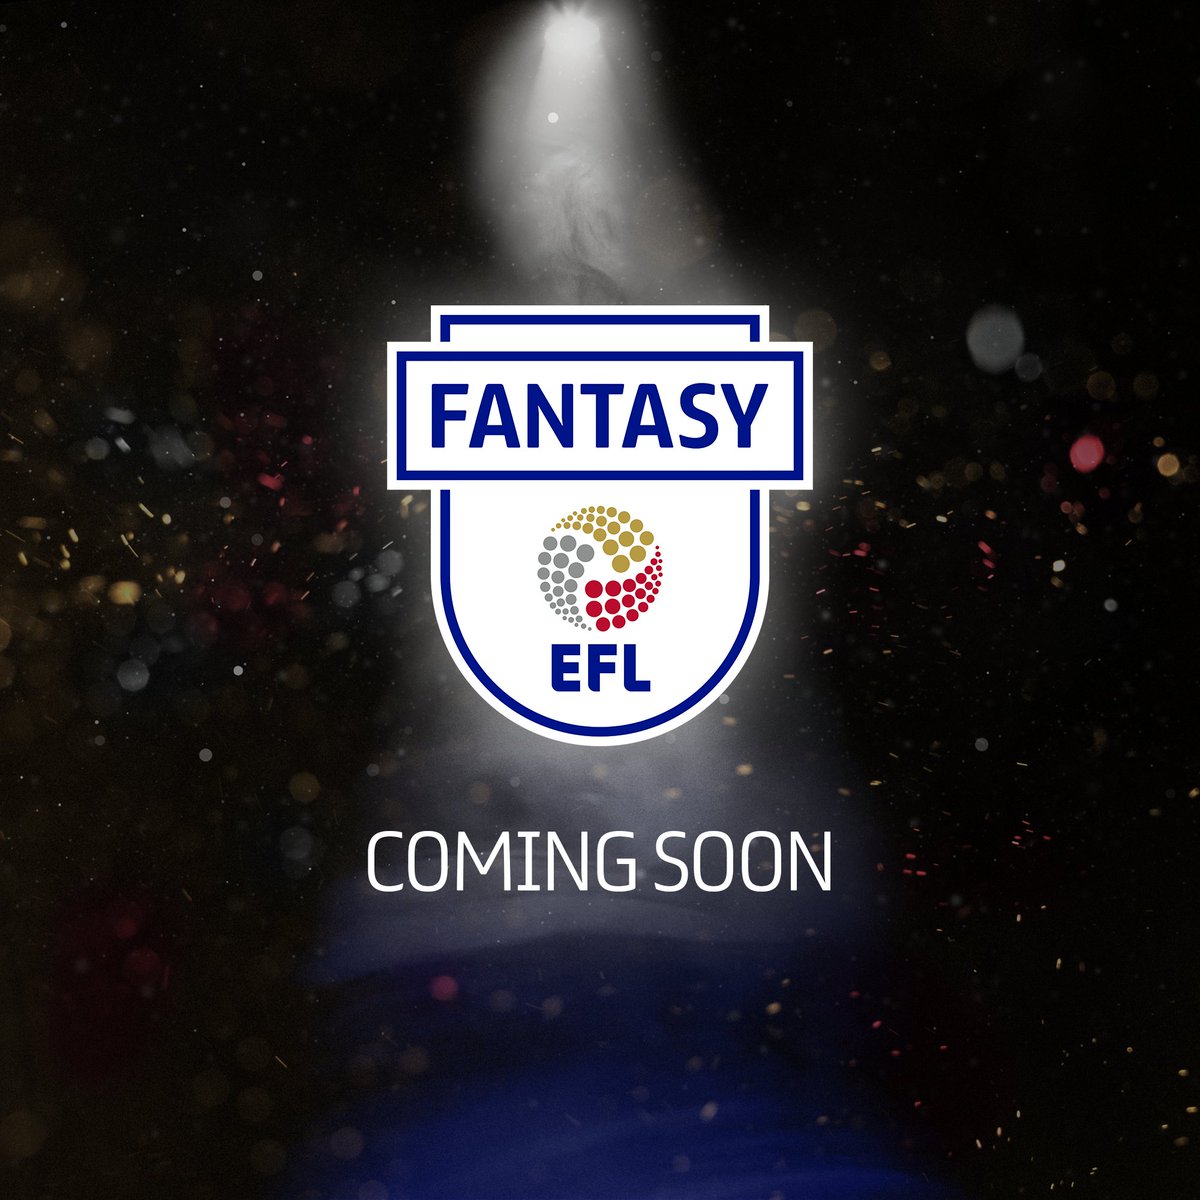 Fantasy EFL is coming! 🤩 Want to be the first to hear more? Visit fantasy.efl.com now. #EFL | #FantasyEFL